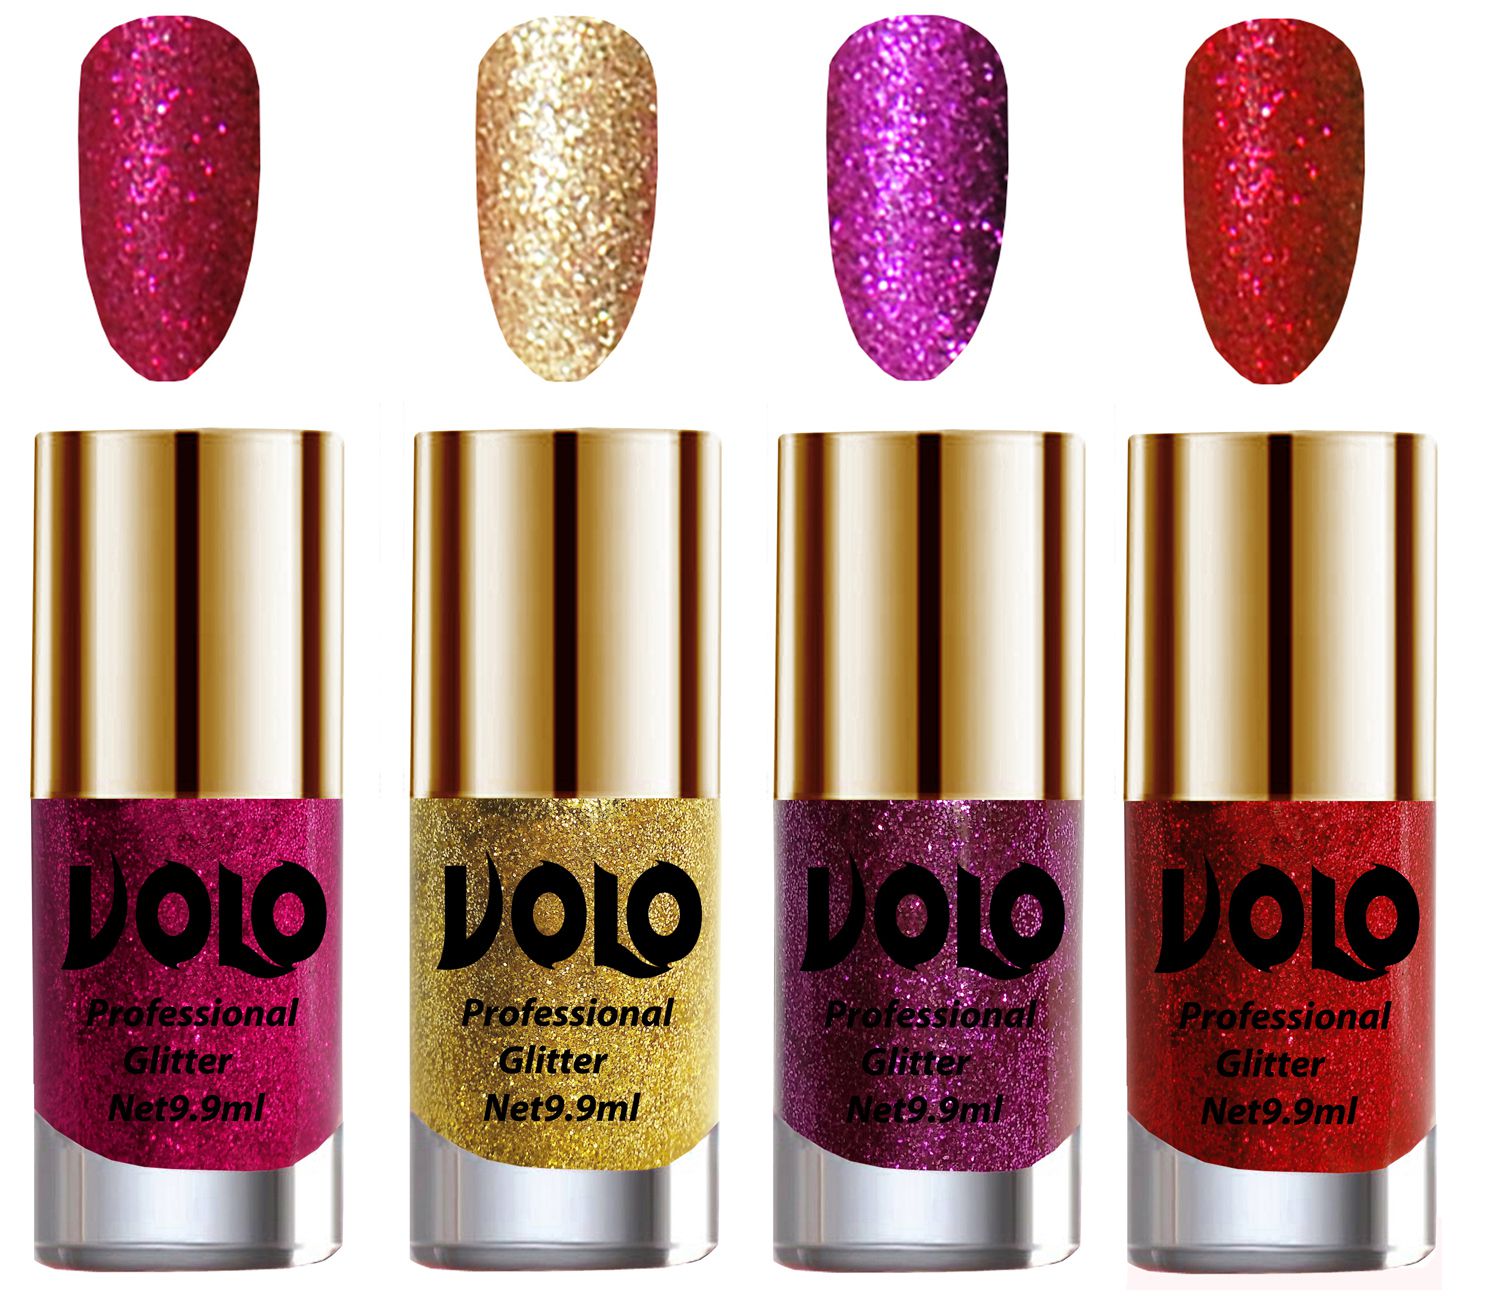     			VOLO Professionally Used Glitter Shine Nail Polish Magenta,Gold,Purple Red Pack of 4 39 mL